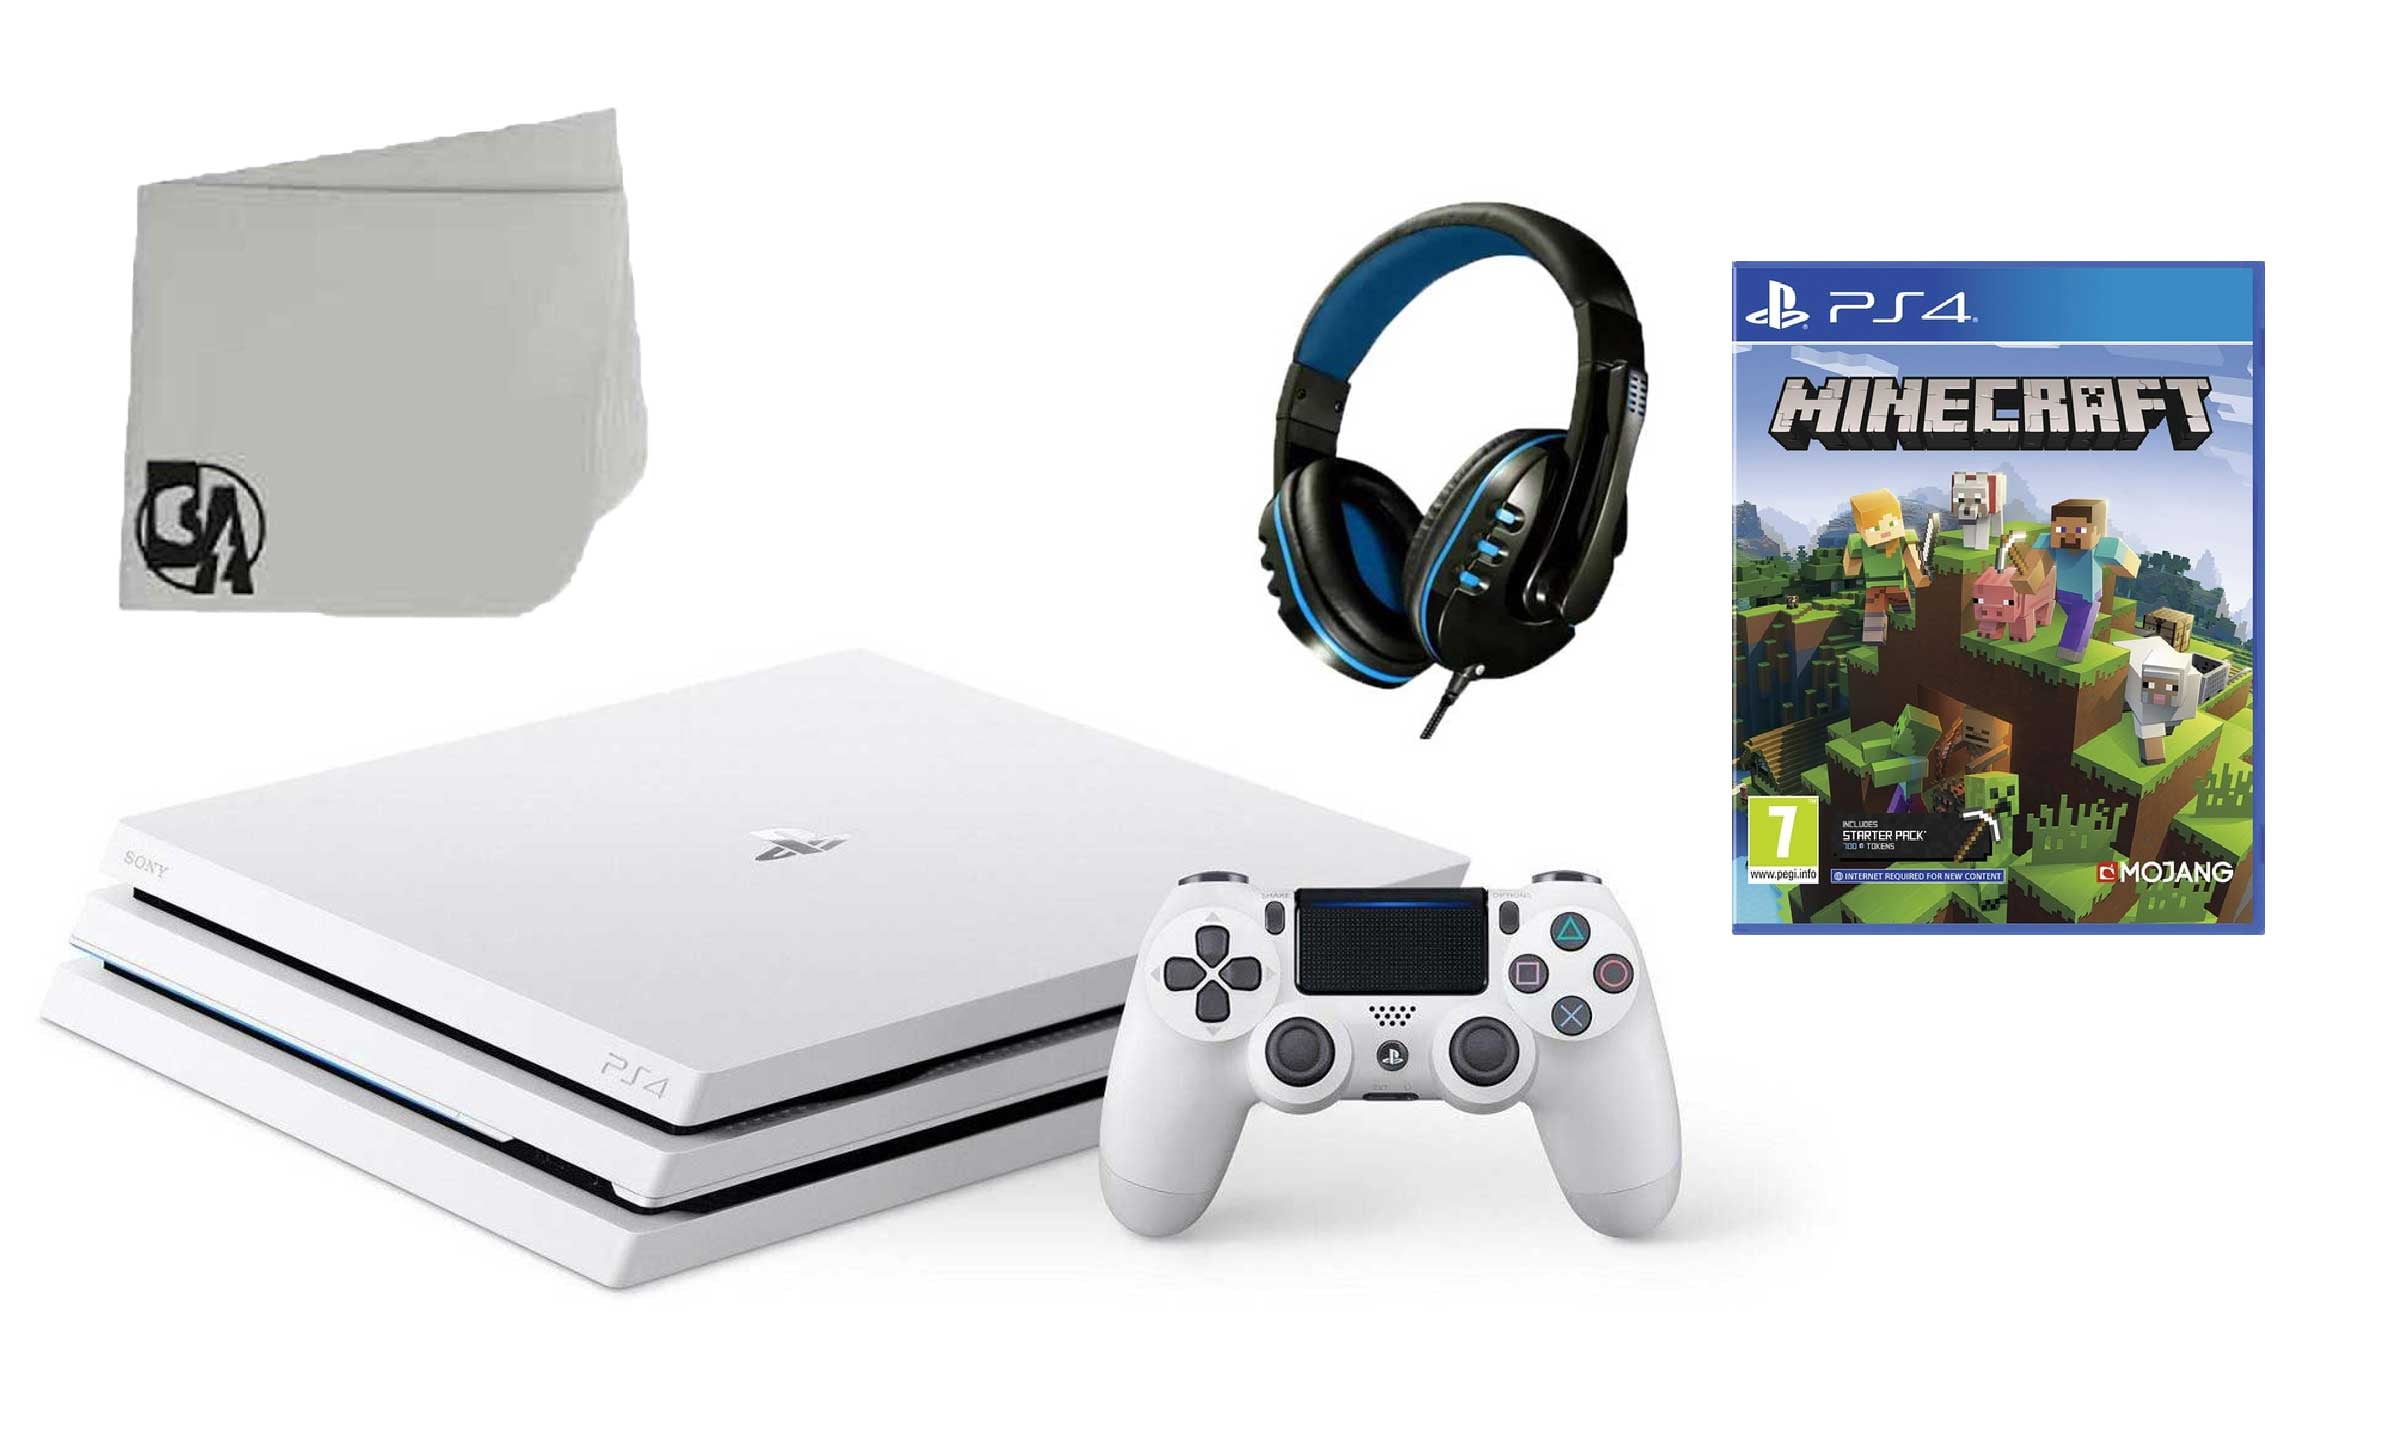 1TB Used Glacier AXTION Gaming 4 PlayStation with BOLT Console PRO White Bundle Minecraft Sony